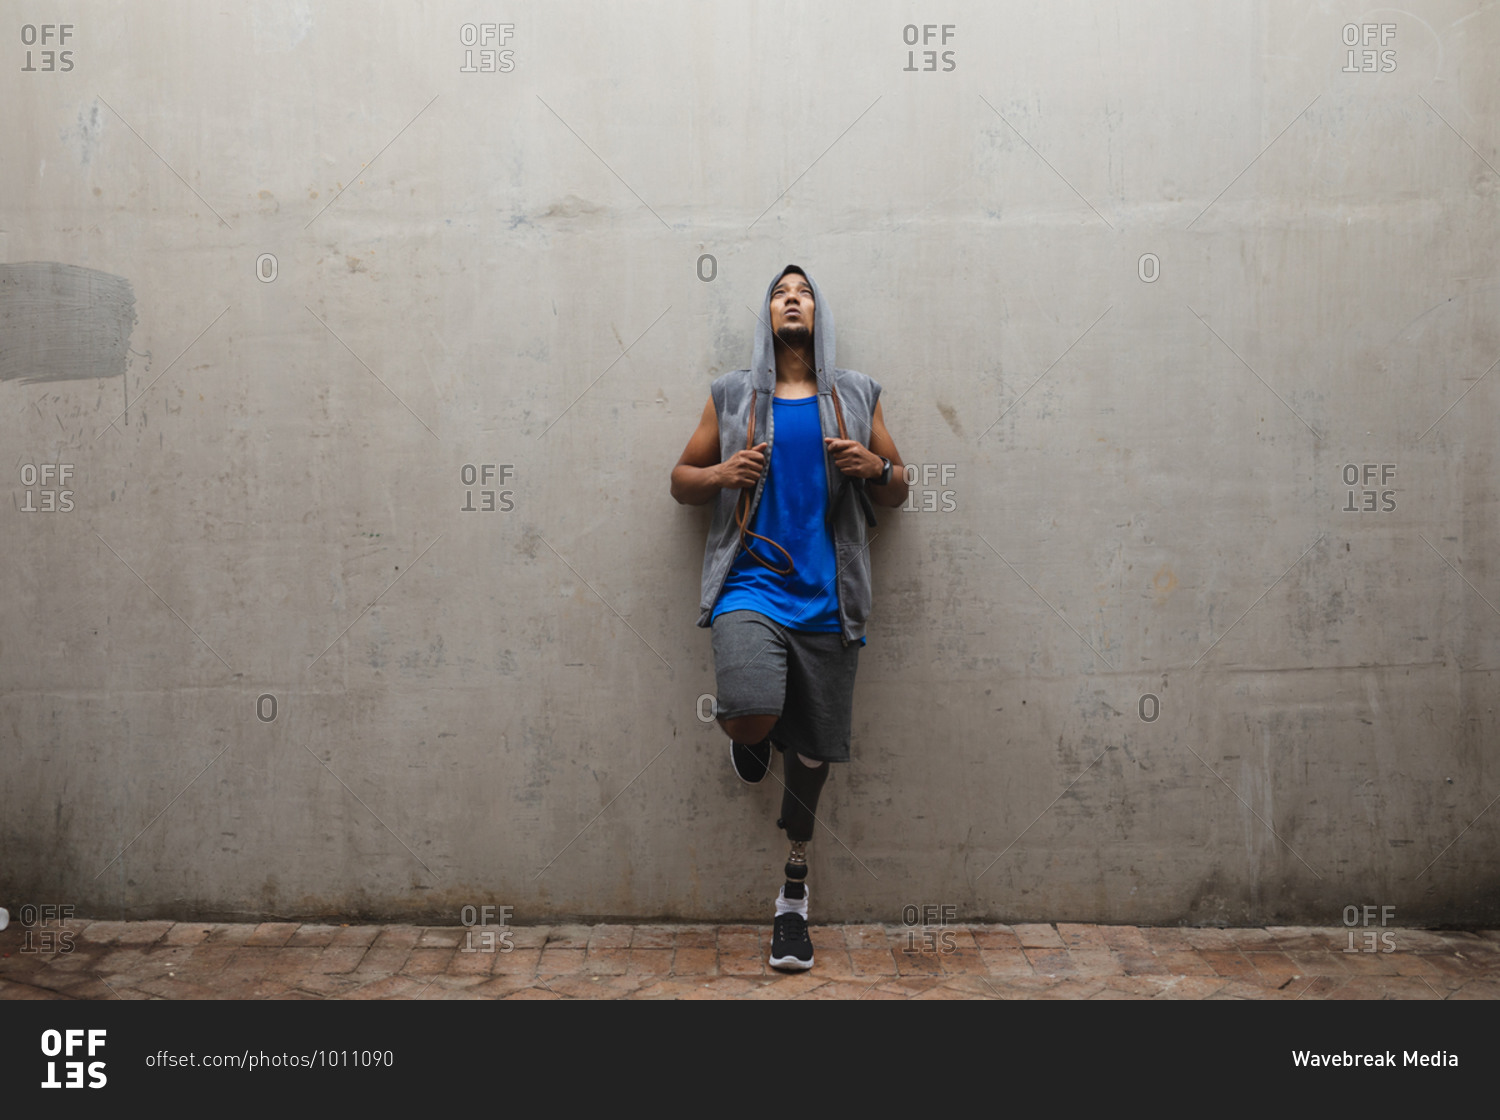 Disabled mixed race man with a prosthetic leg, working out in an urban park, wearing hooded top leaning against a wall holding skipping rope taking a break. Fitness disability healthy lifestyle.